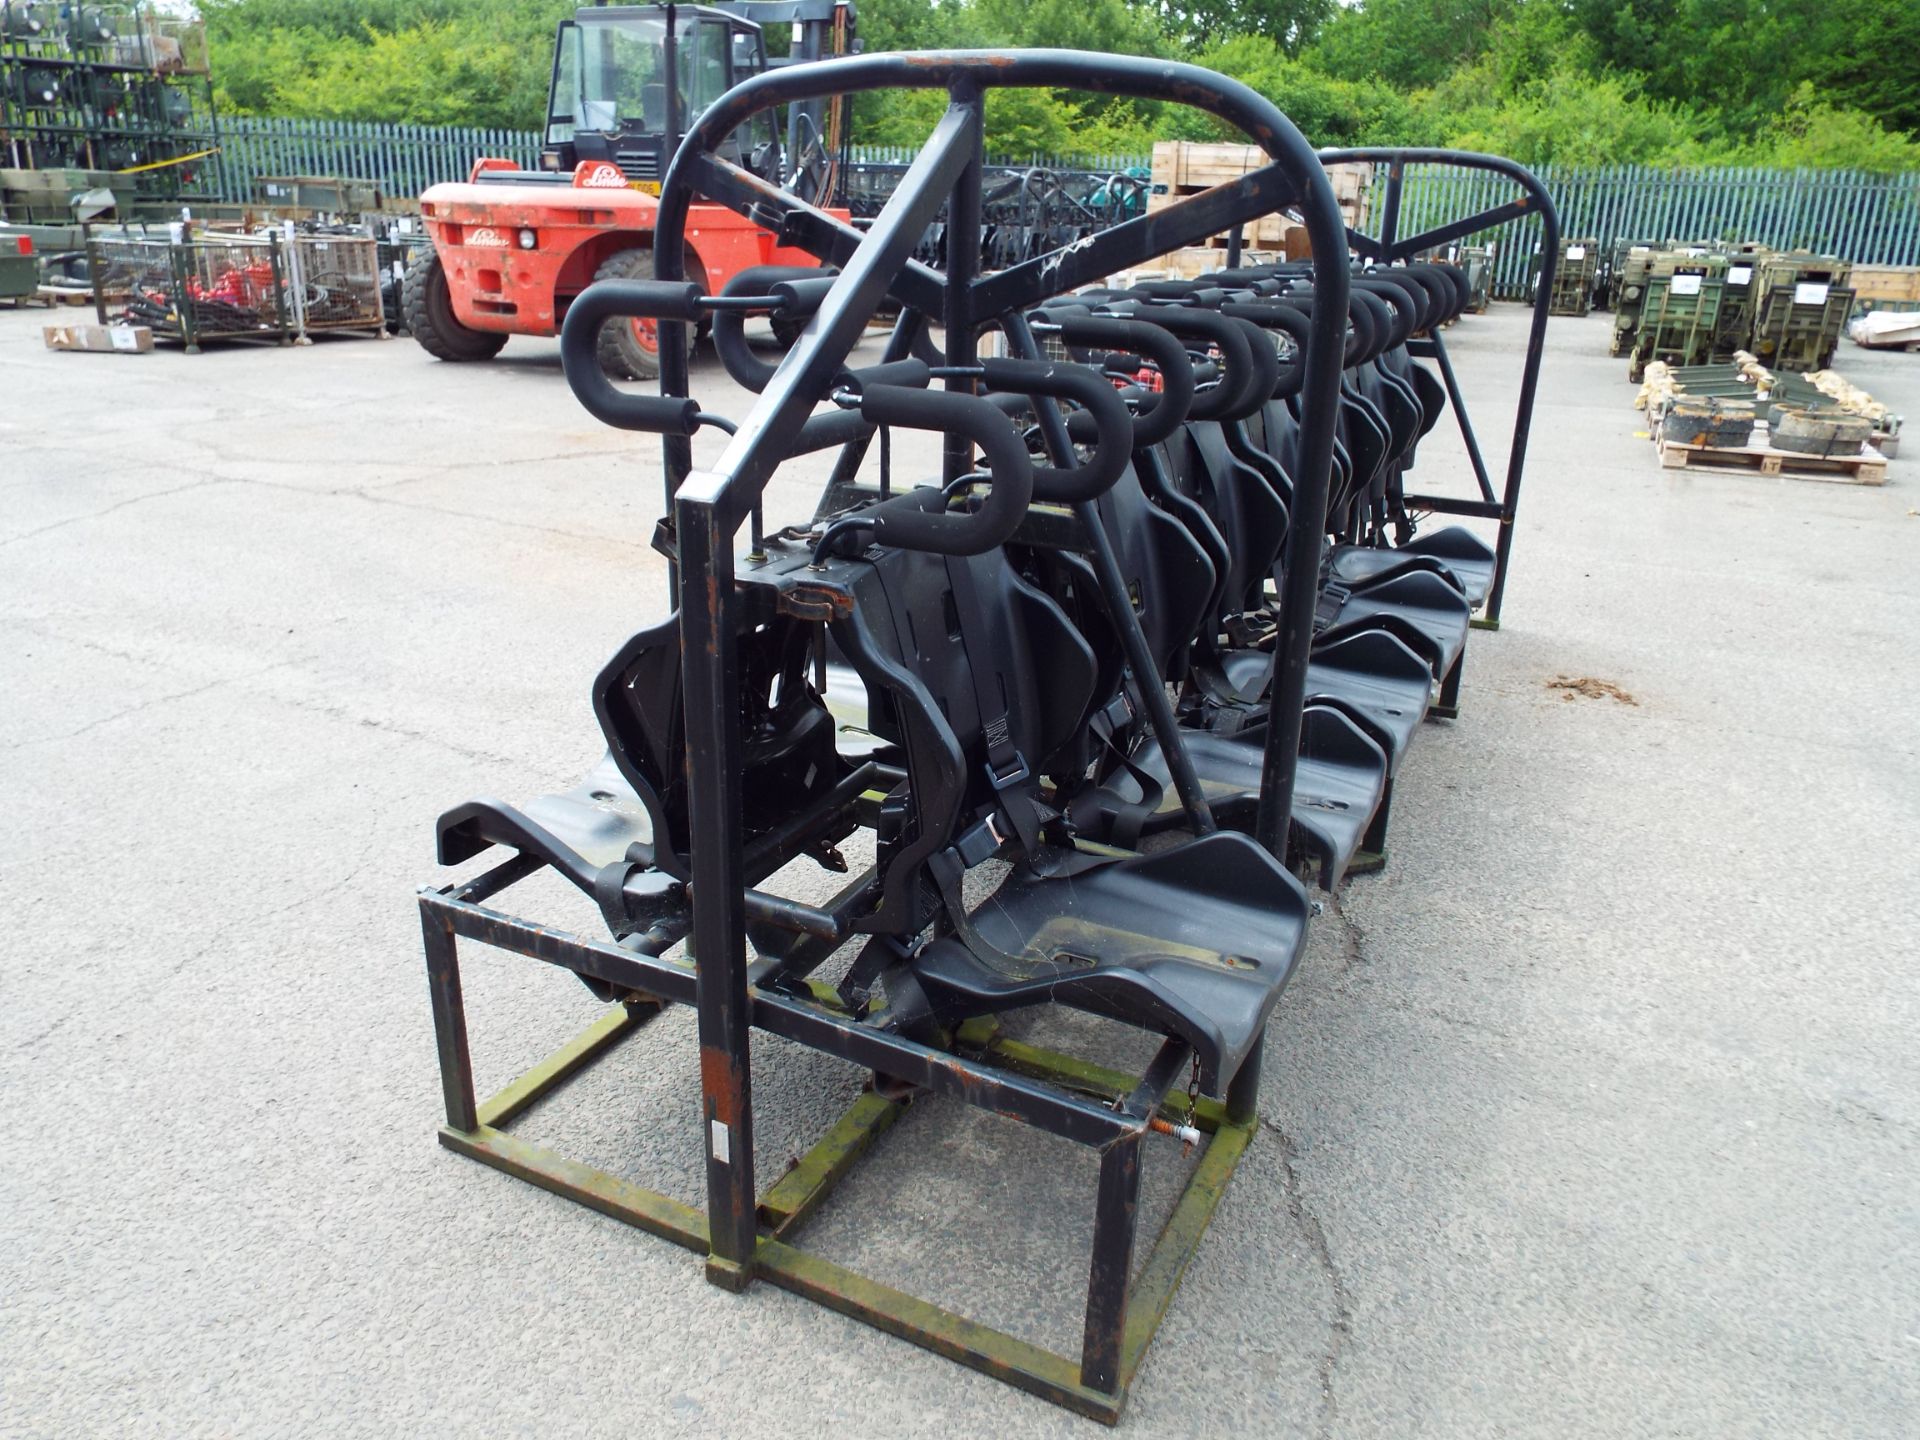 14 Man Security Seat suitable for Leyland Dafs, Bedfords etc - Image 2 of 7